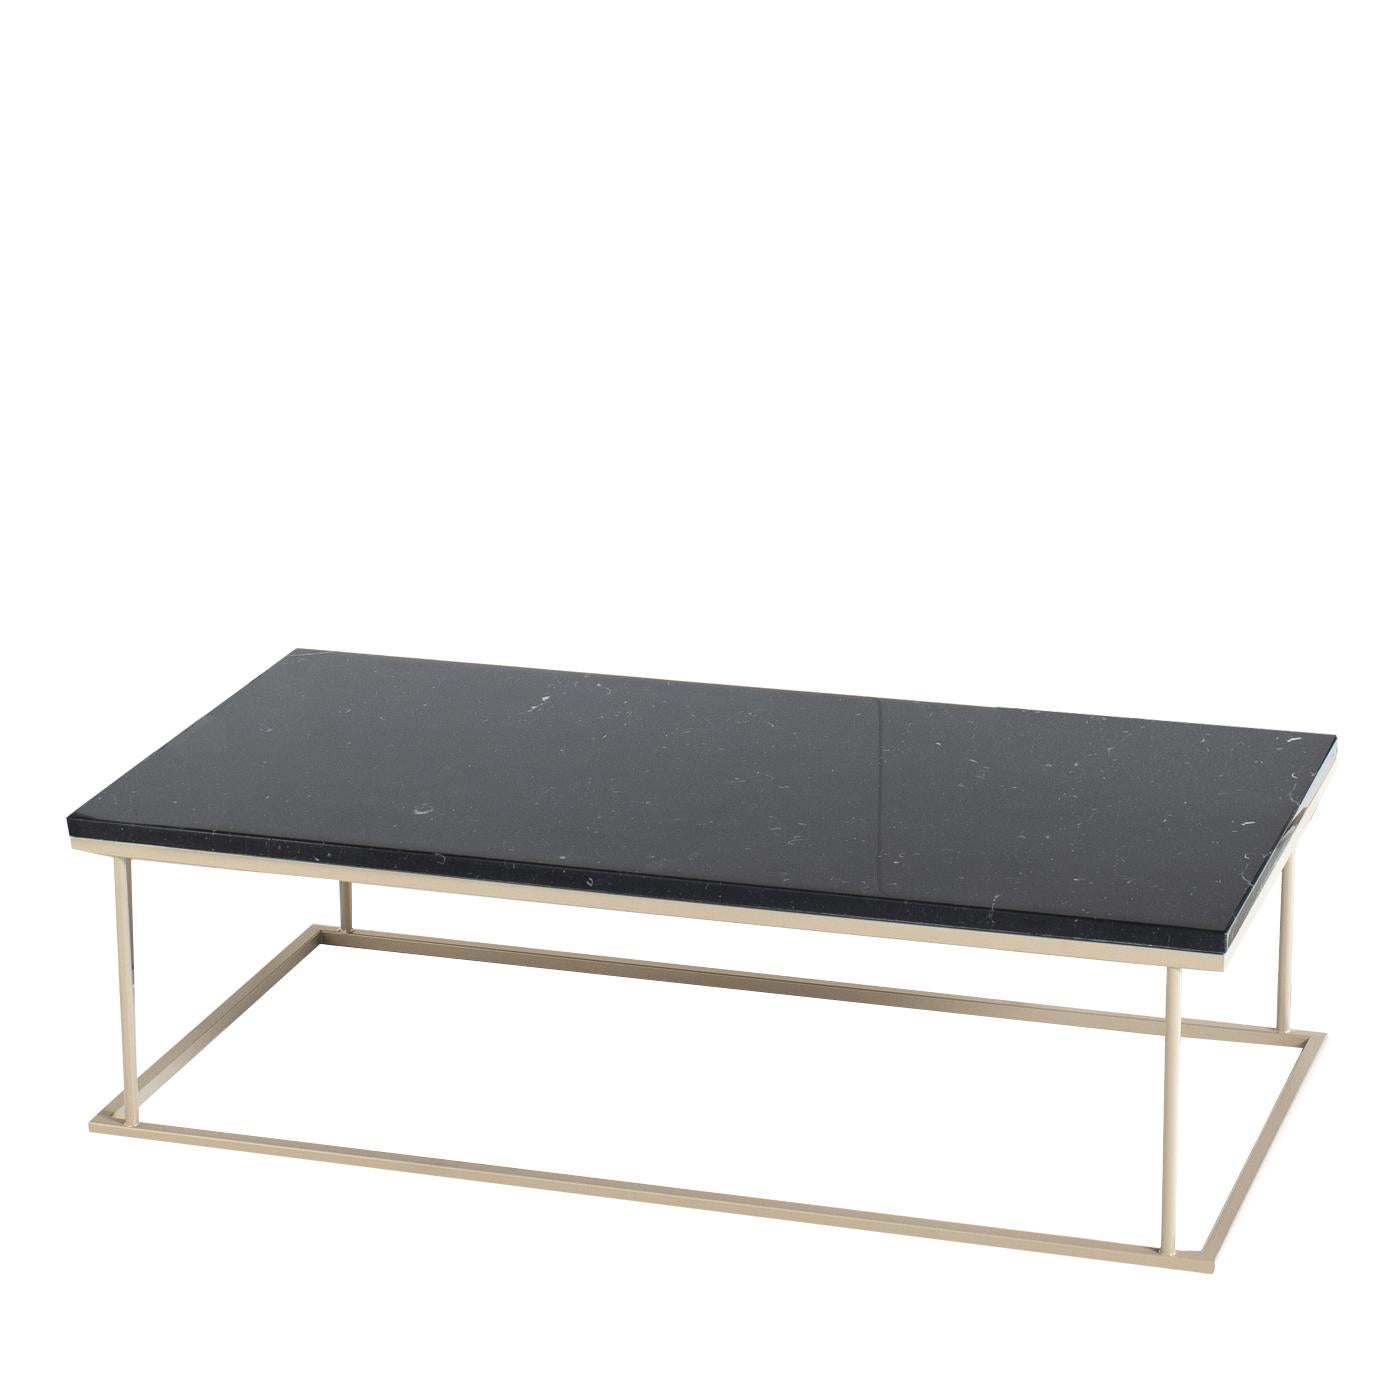 From a full collection of personalizable accent tables for contemporary living rooms, the Thin Coffee Table is characterized by its slim metal frame and rounded legs providing a fun contrast. The table is fully customizable in size, materials and